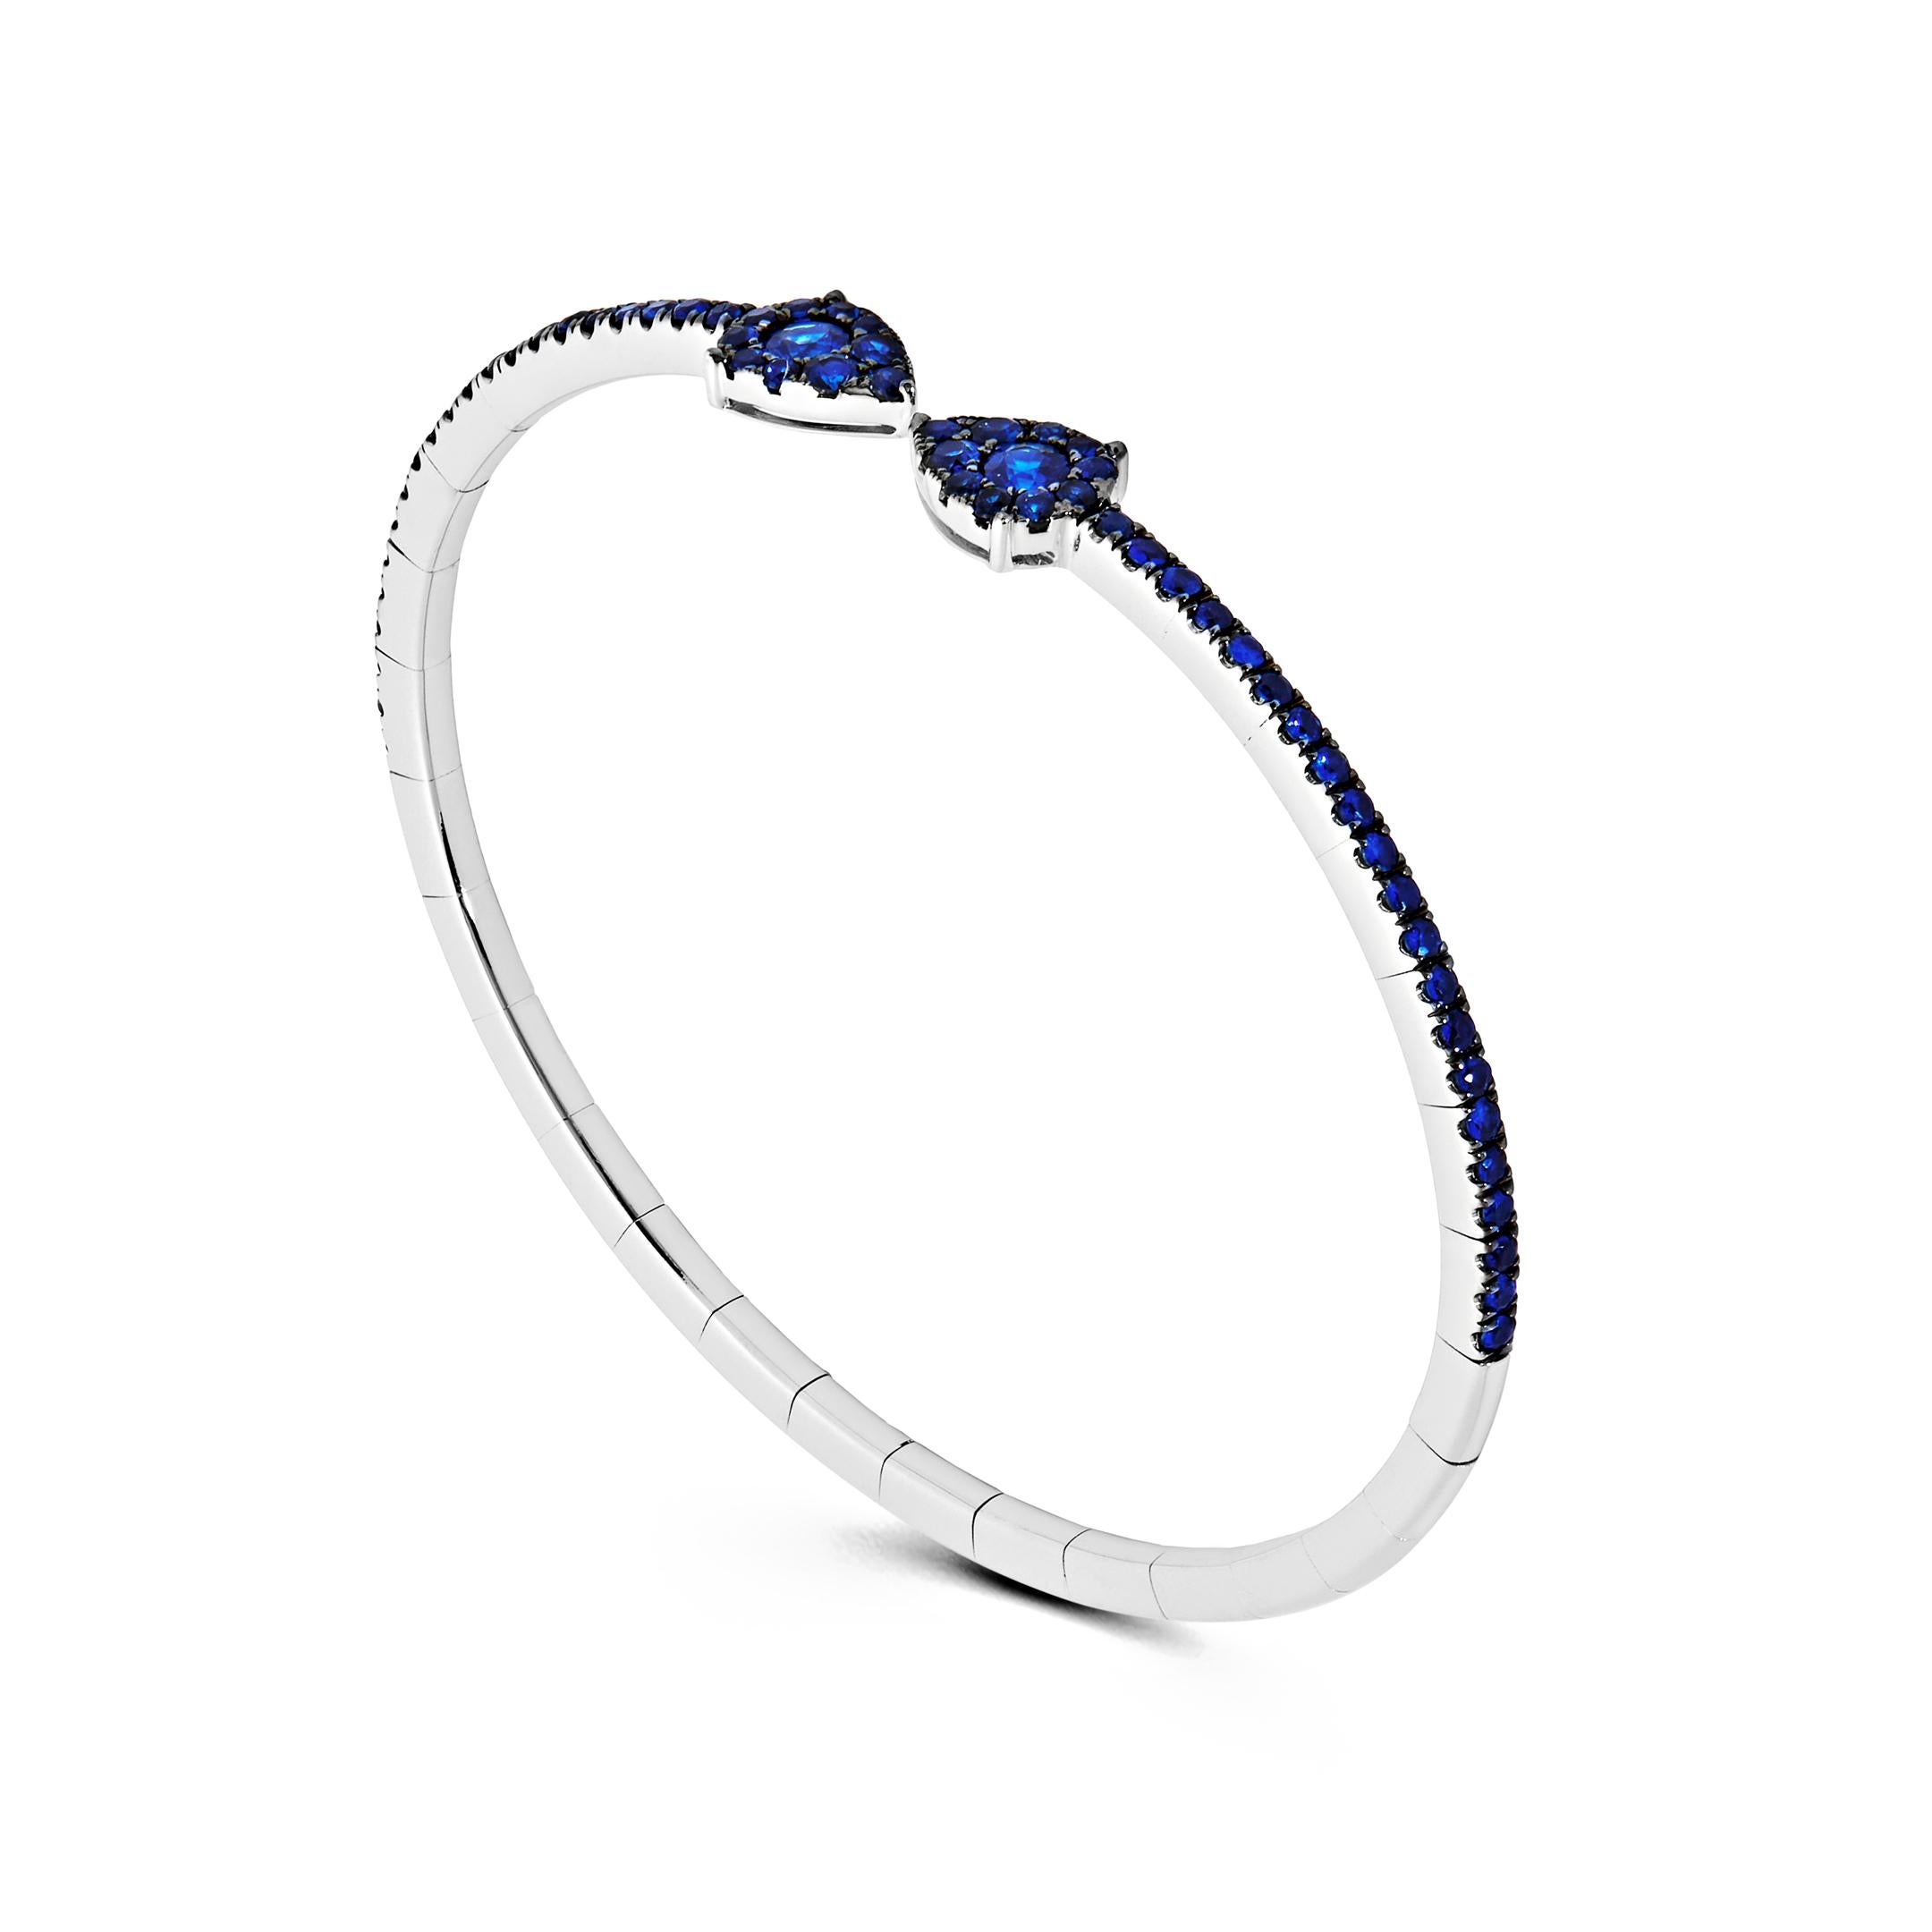 The epitome of effortless glamour, the Blue Sapphire Flexible Cuff Bracelet is the ideal layering piece. Thanks to its stretchy technology, the 18-karat white gold and blue sapphire jewel can be comfortably slipped on and off. Pair several of these